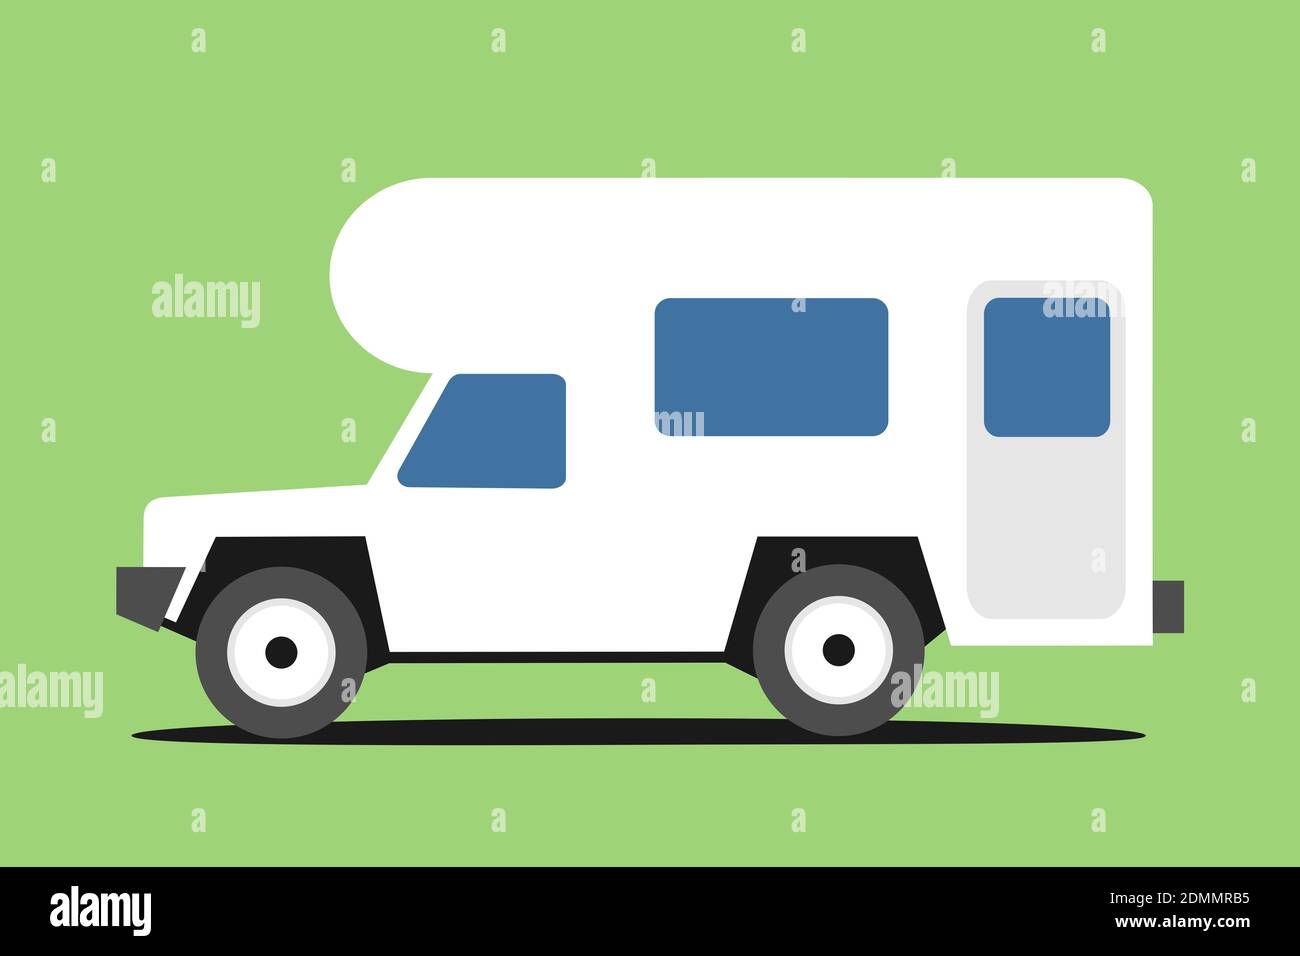 Recreational vehicle, motorhome and caravan - automobile and car with accommodation space. Vector illustration Stock Photo